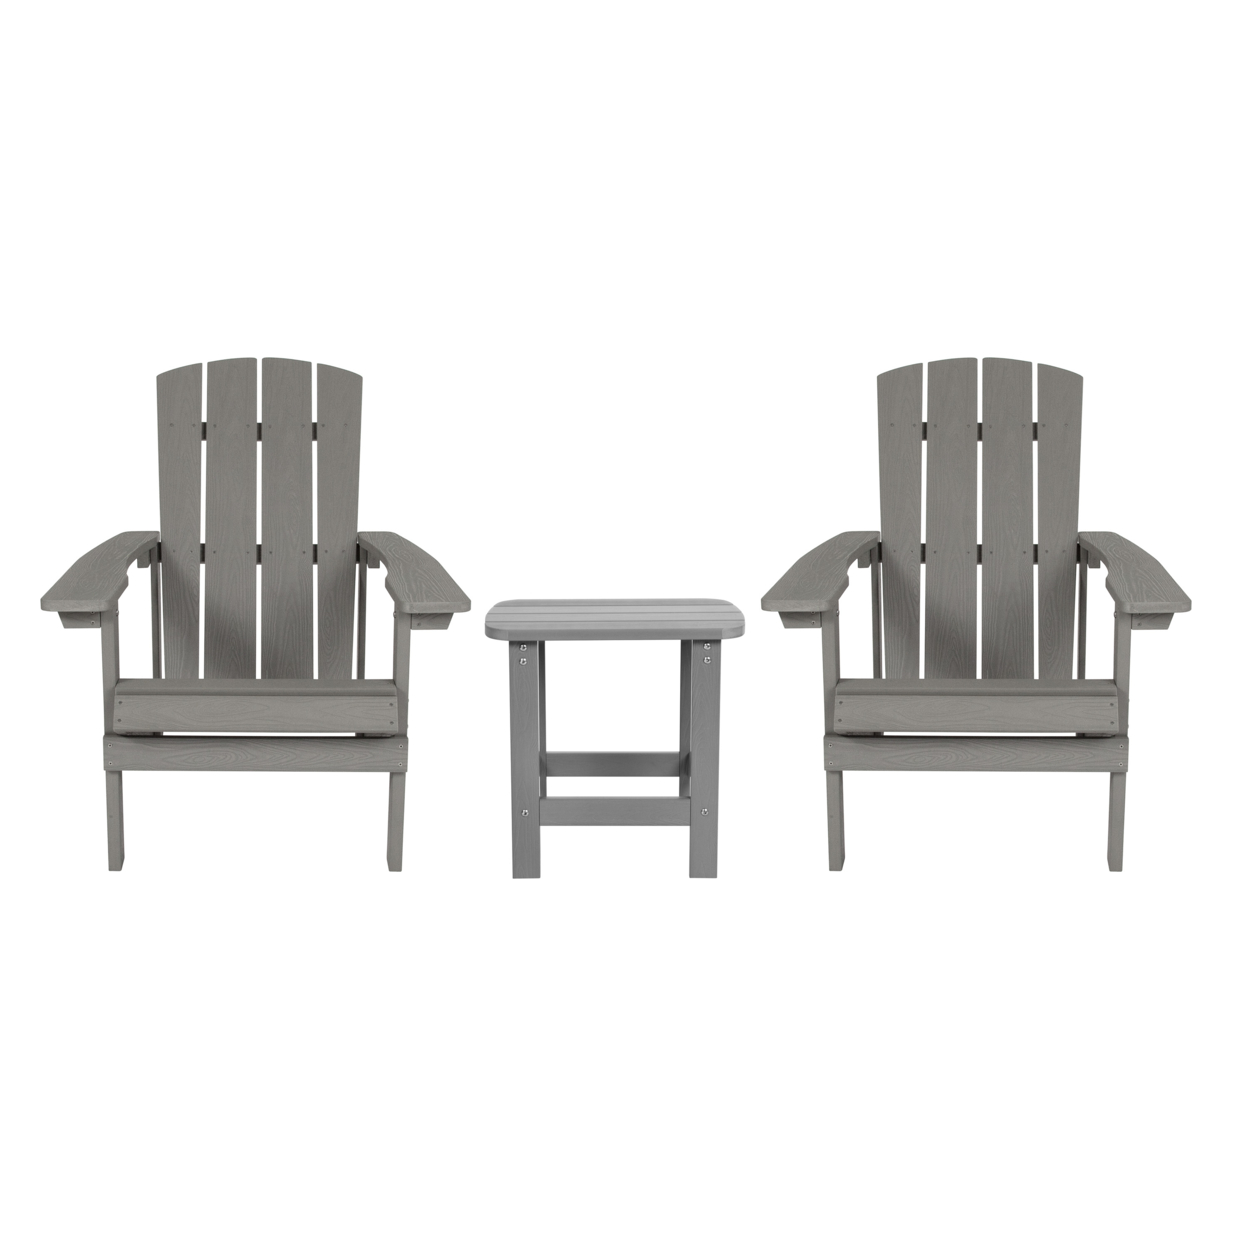 3 Piece Indoor Outdoor Seating Set, Adirondack Style Chairs, 1 Table